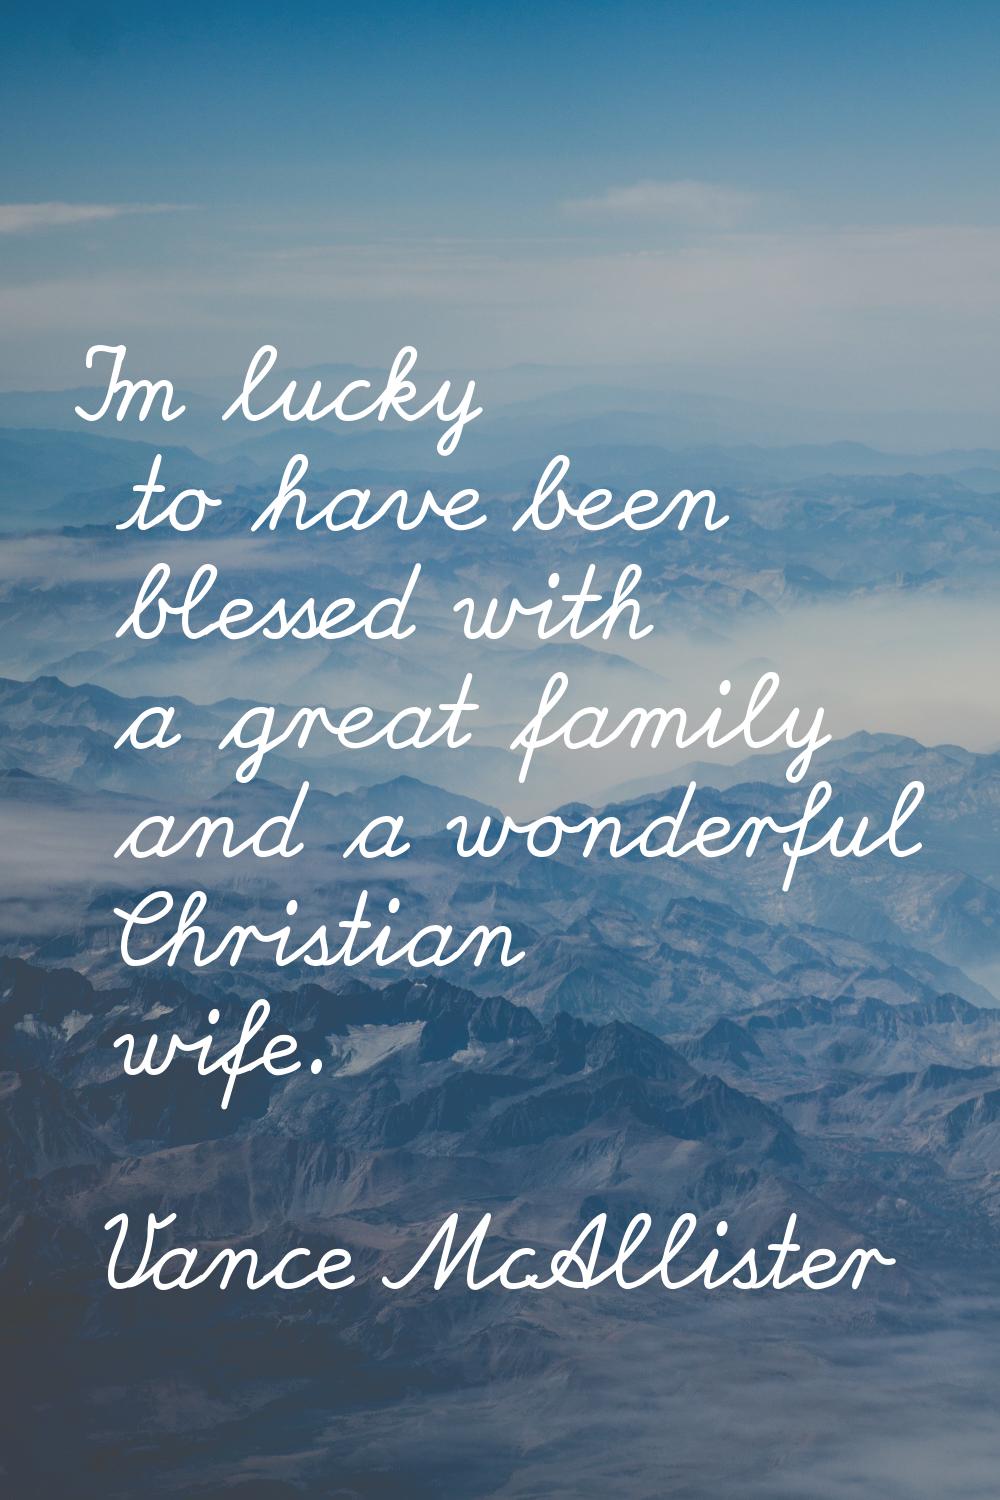 I'm lucky to have been blessed with a great family and a wonderful Christian wife.